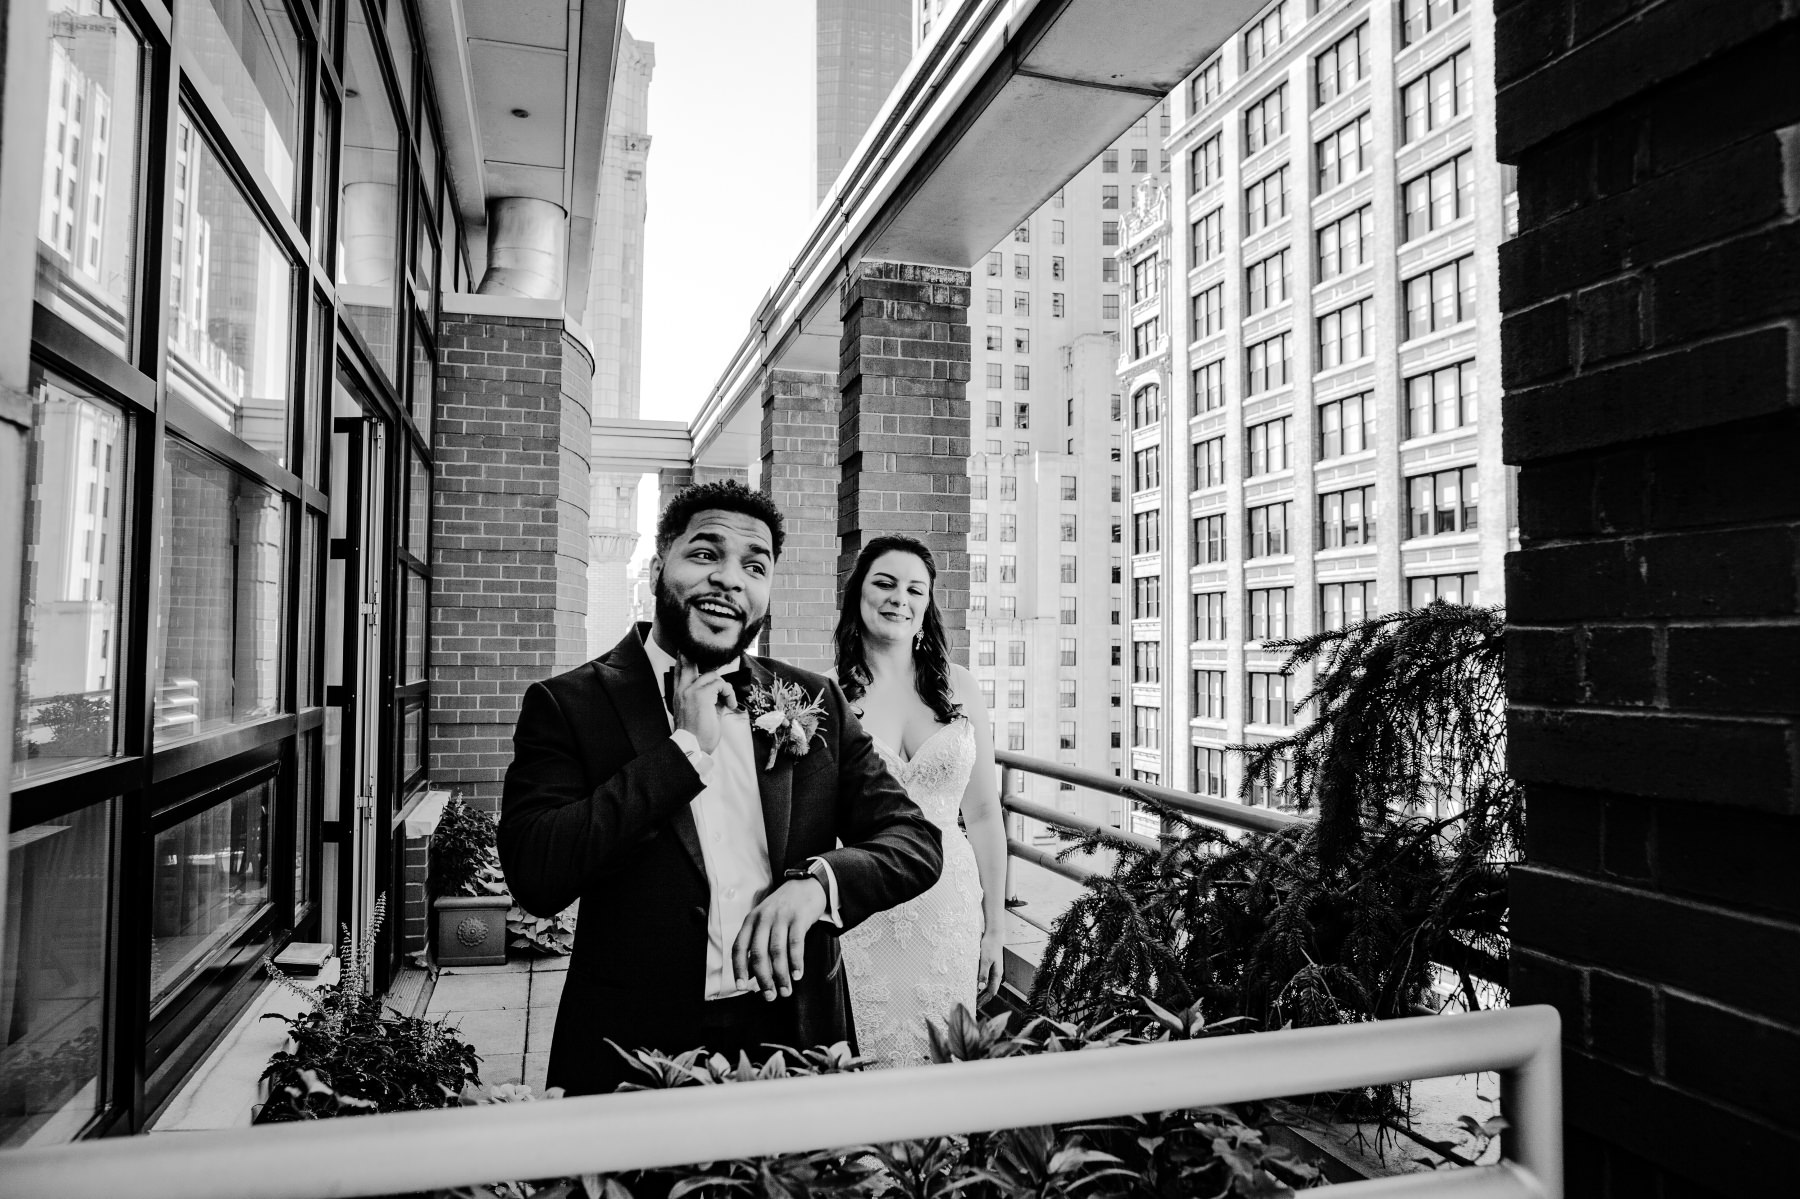  First look between Caitlin and Bryson at the Giraffe Hotel in Midtown Manhattan, New York, before their Wedding Ceremony. We got this impossible angle because we were on the balcony adjacent, so we were able to tell the story without getting in the 